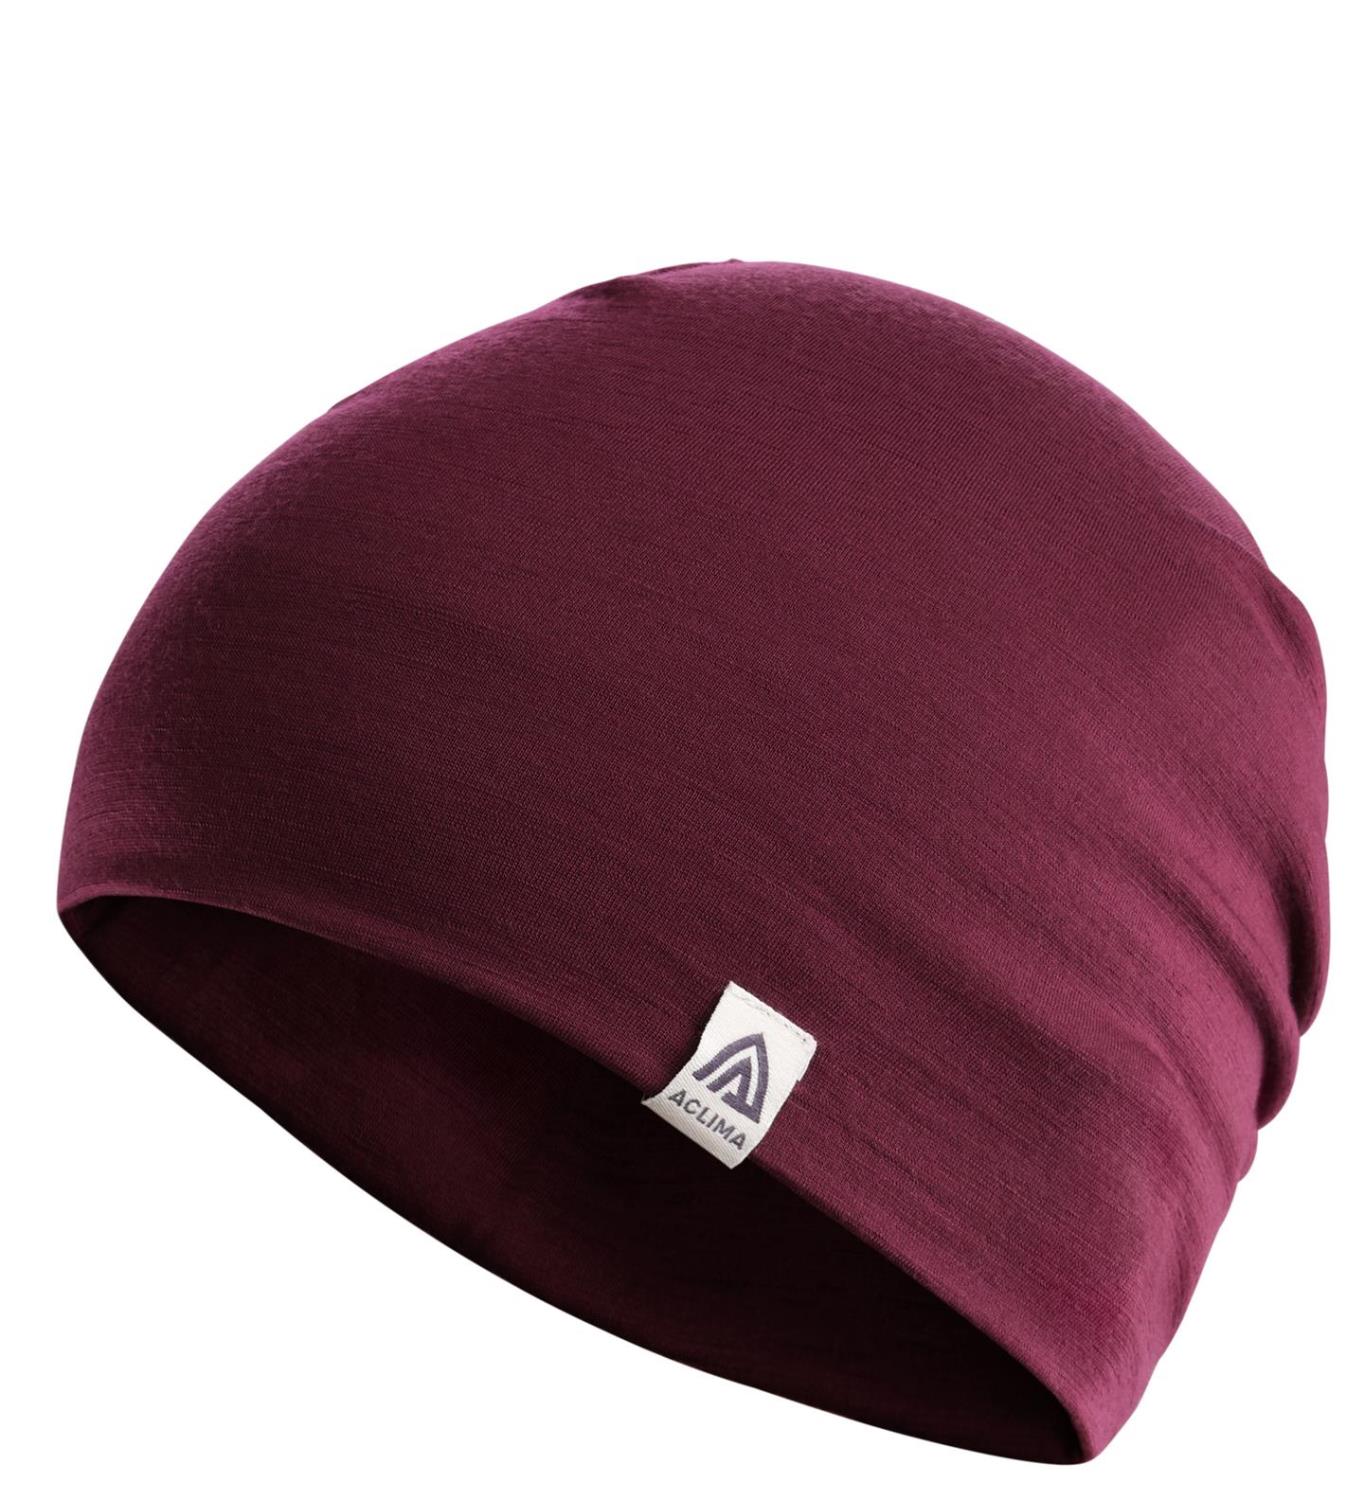 Lightwool Relaxed Beanie One Size "Zinfandel" - Aclima